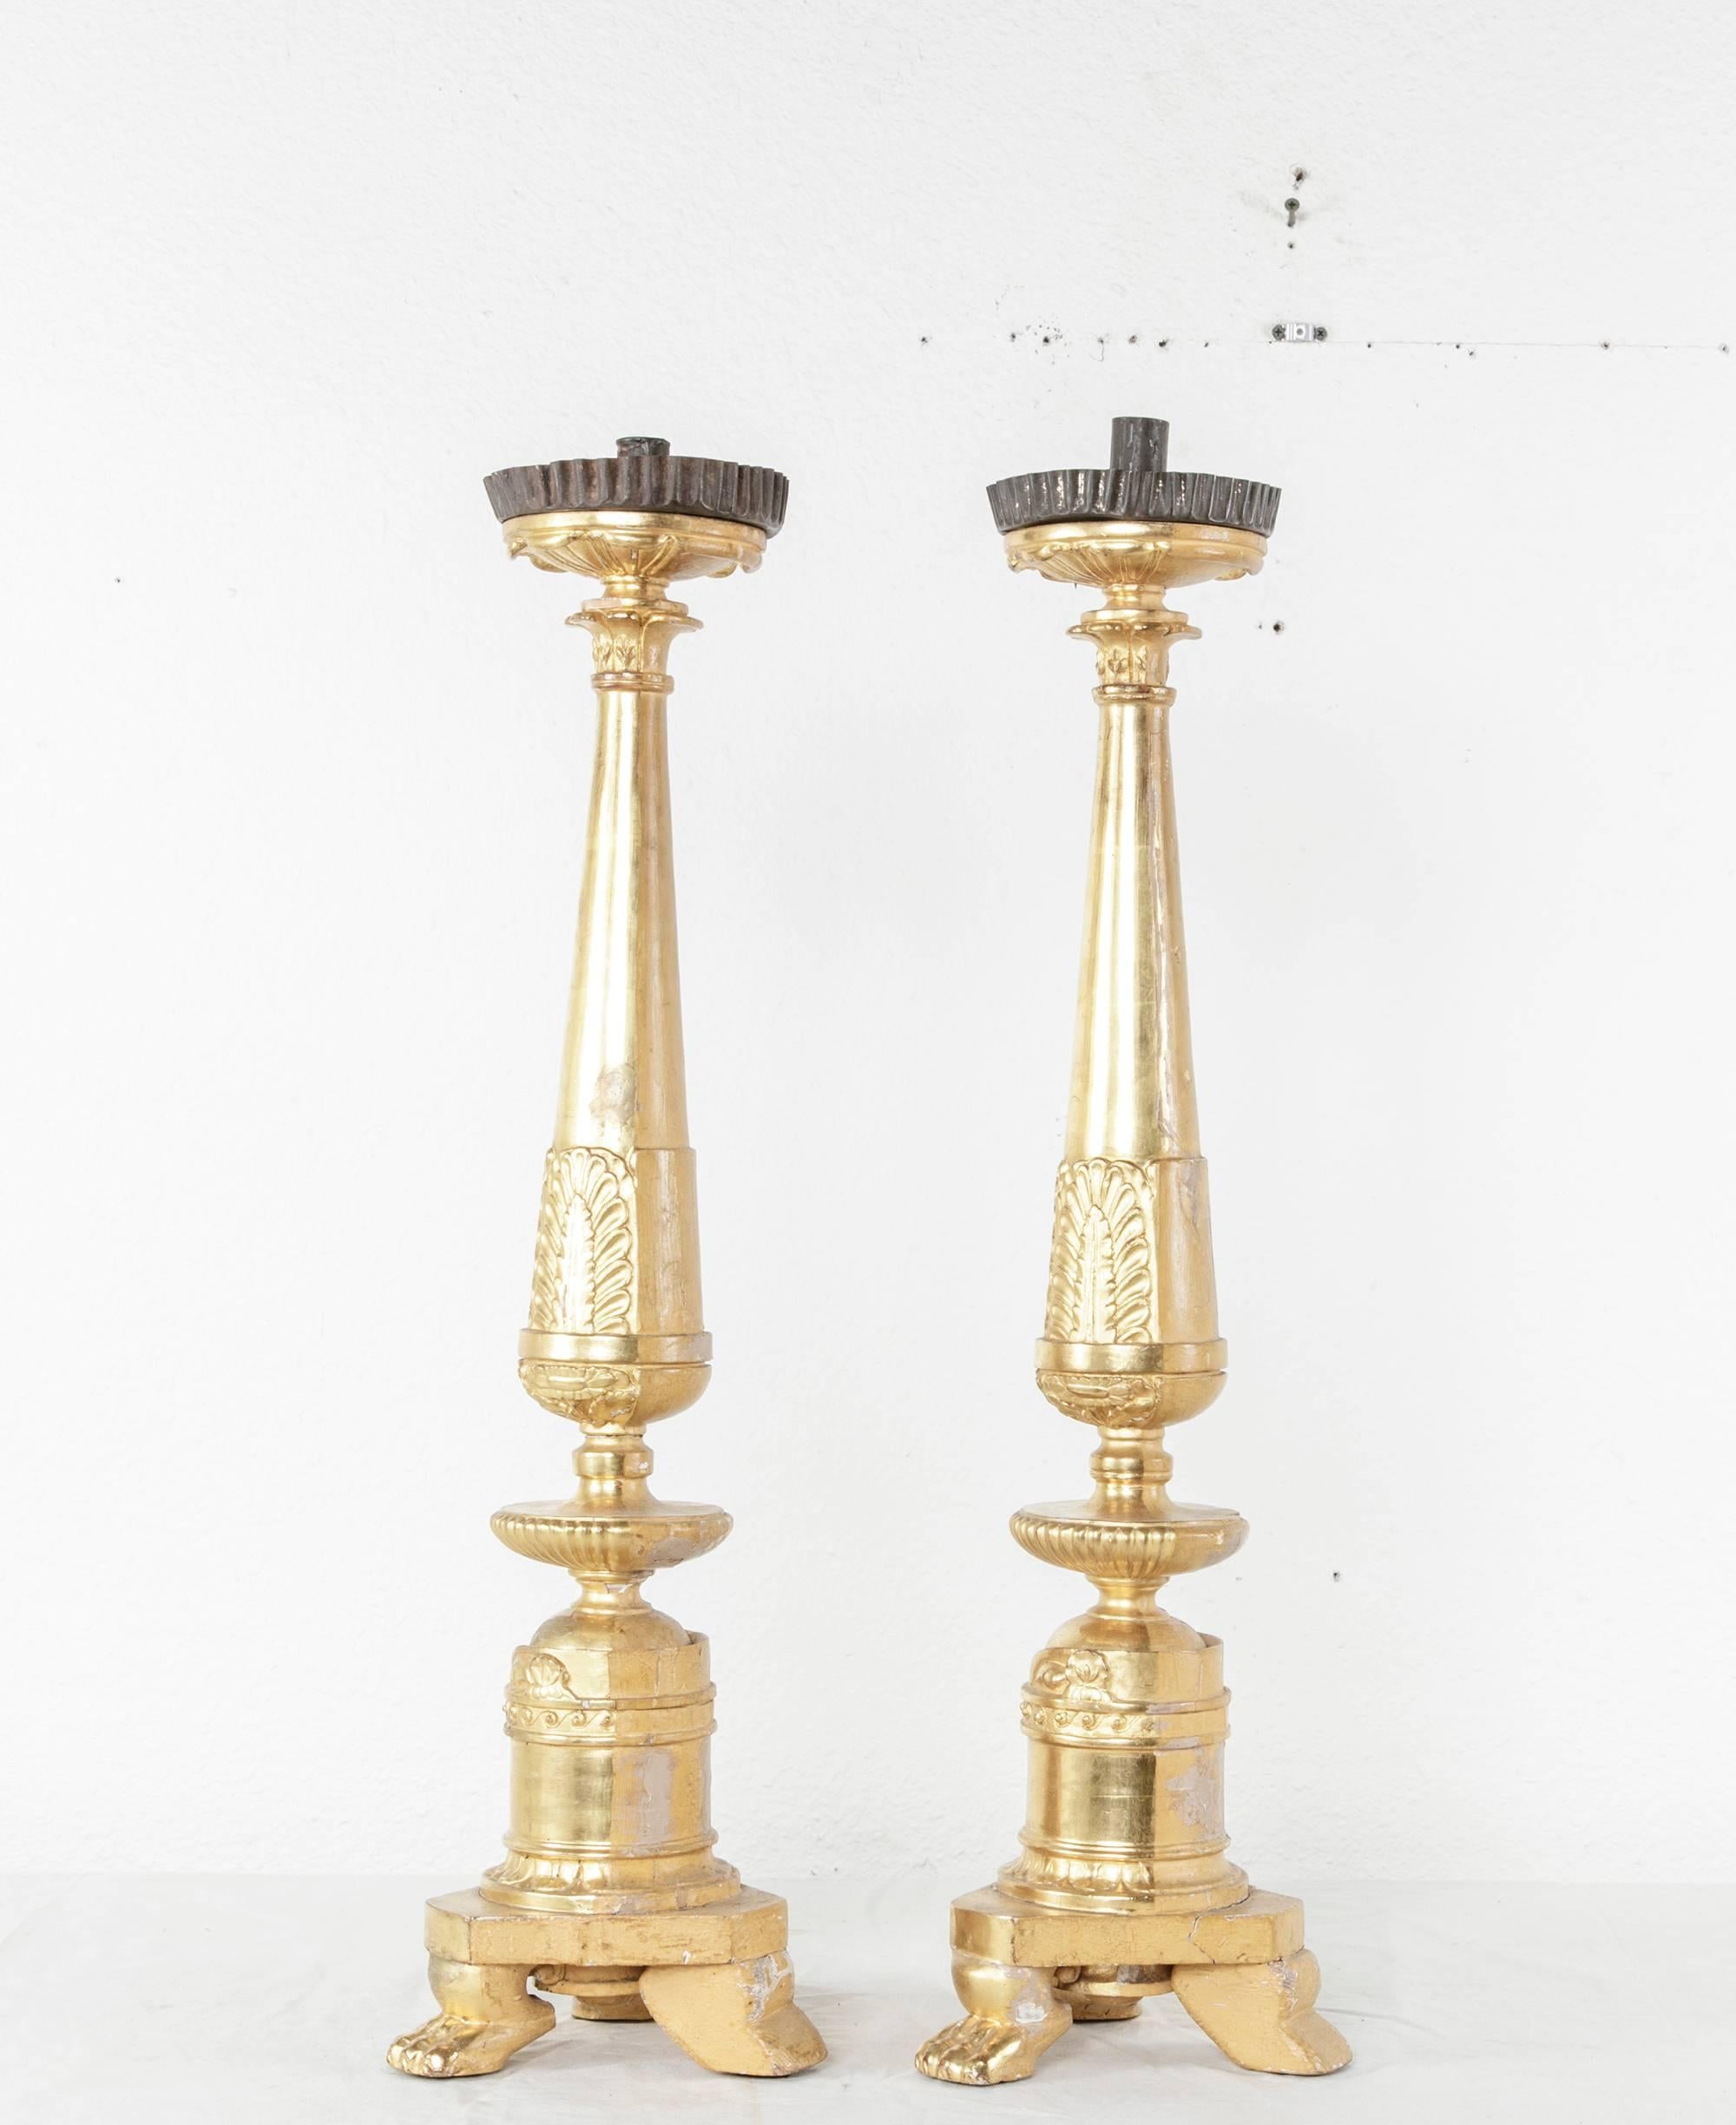 Early 19th Century French Empire Period Giltwood Candlesticks or Prickets In Good Condition For Sale In Fayetteville, AR